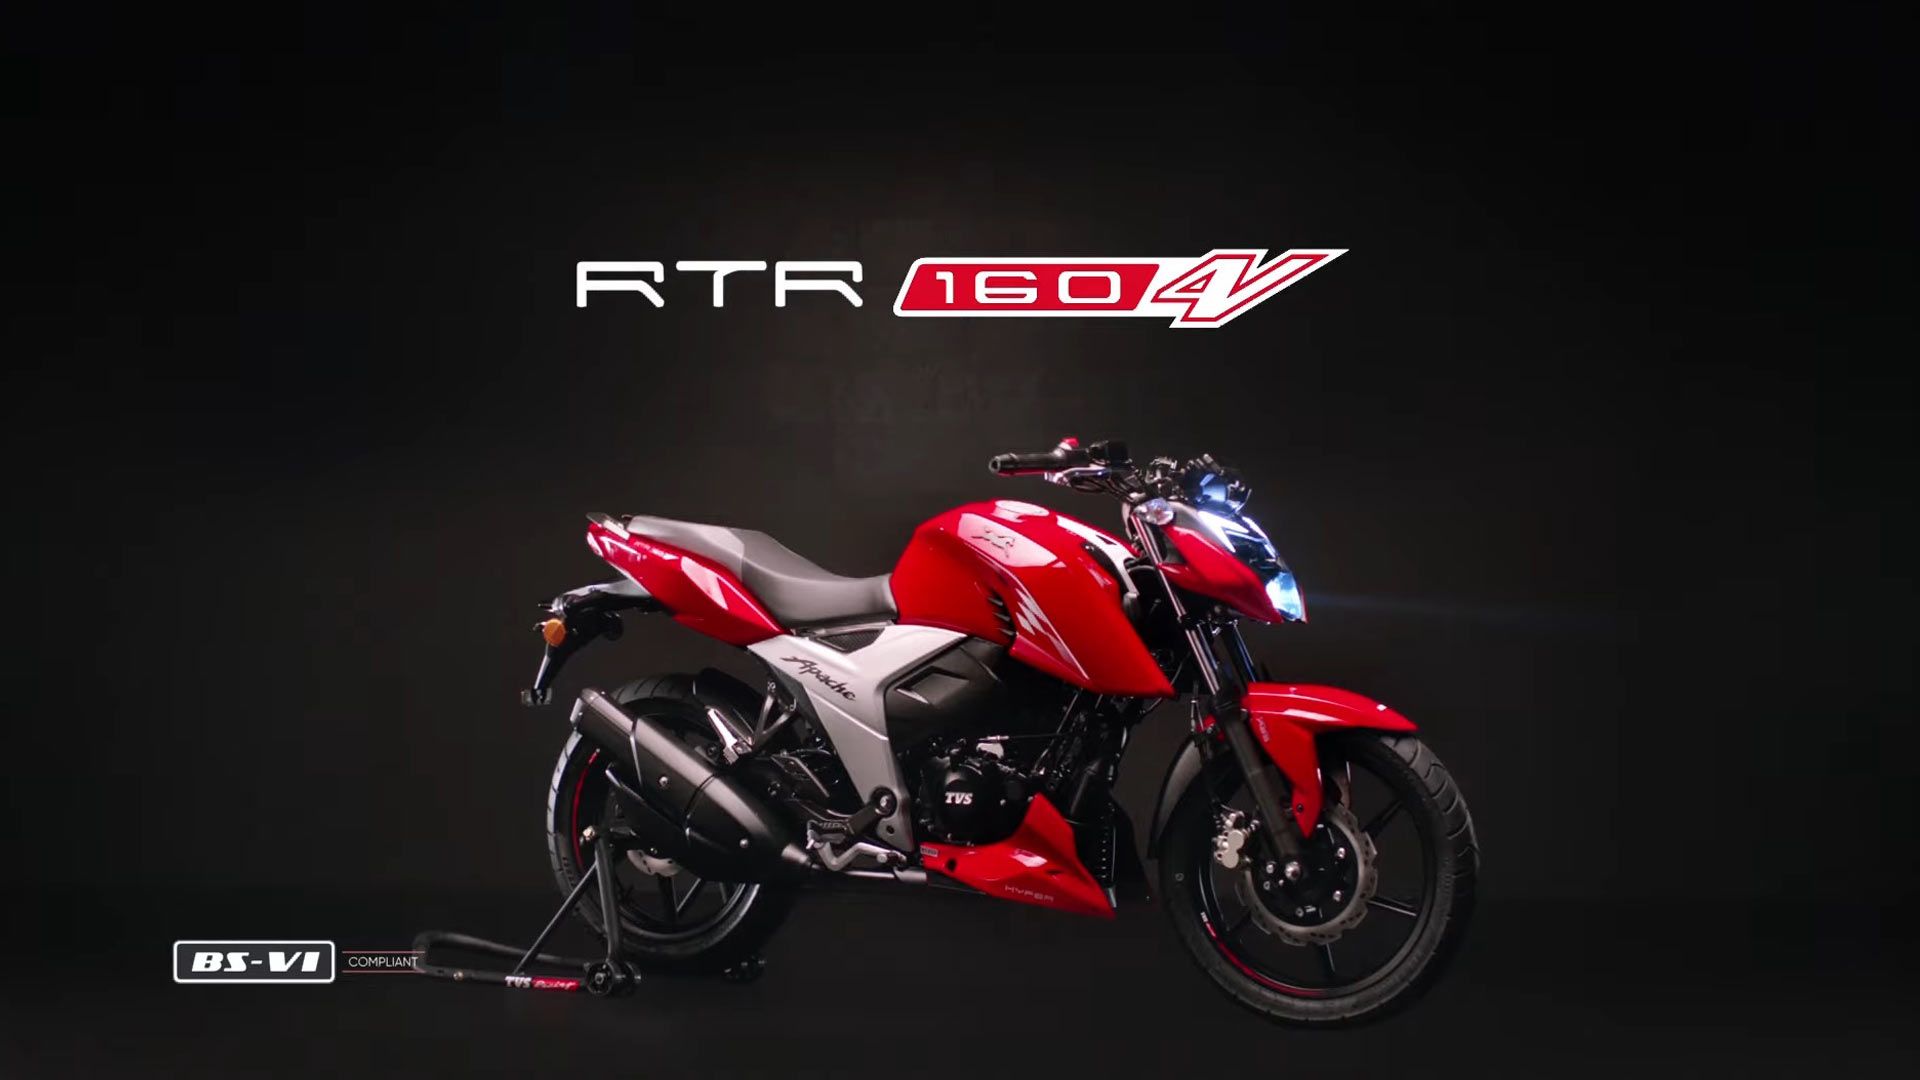 2020 Apache Rtr 160 4v Wallpapers Wallpaper Cave